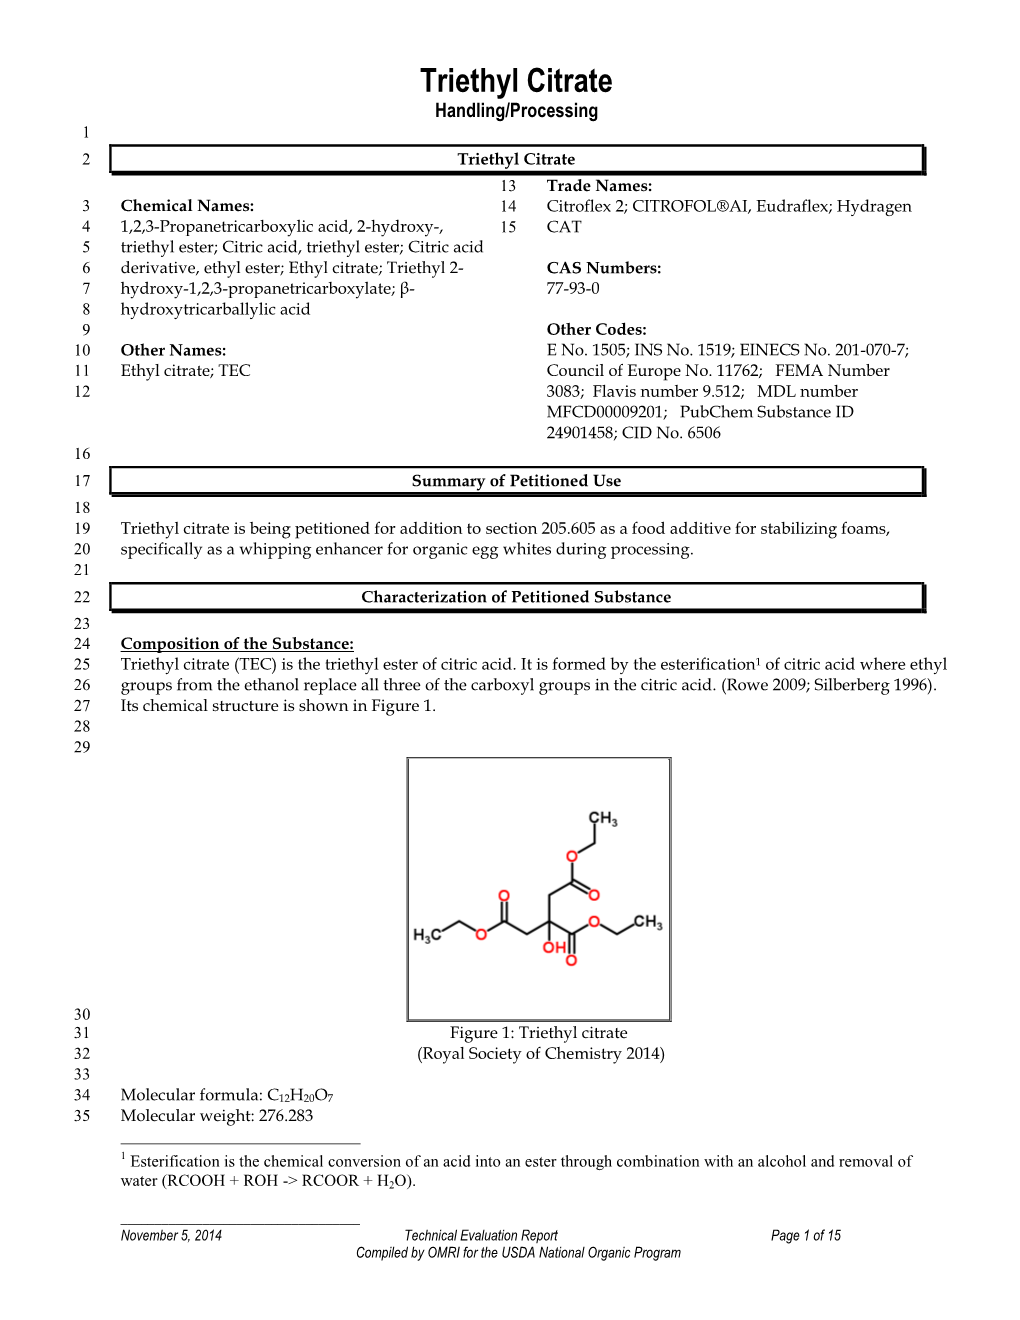 Triethyl Citrate Report 2014.Pdf